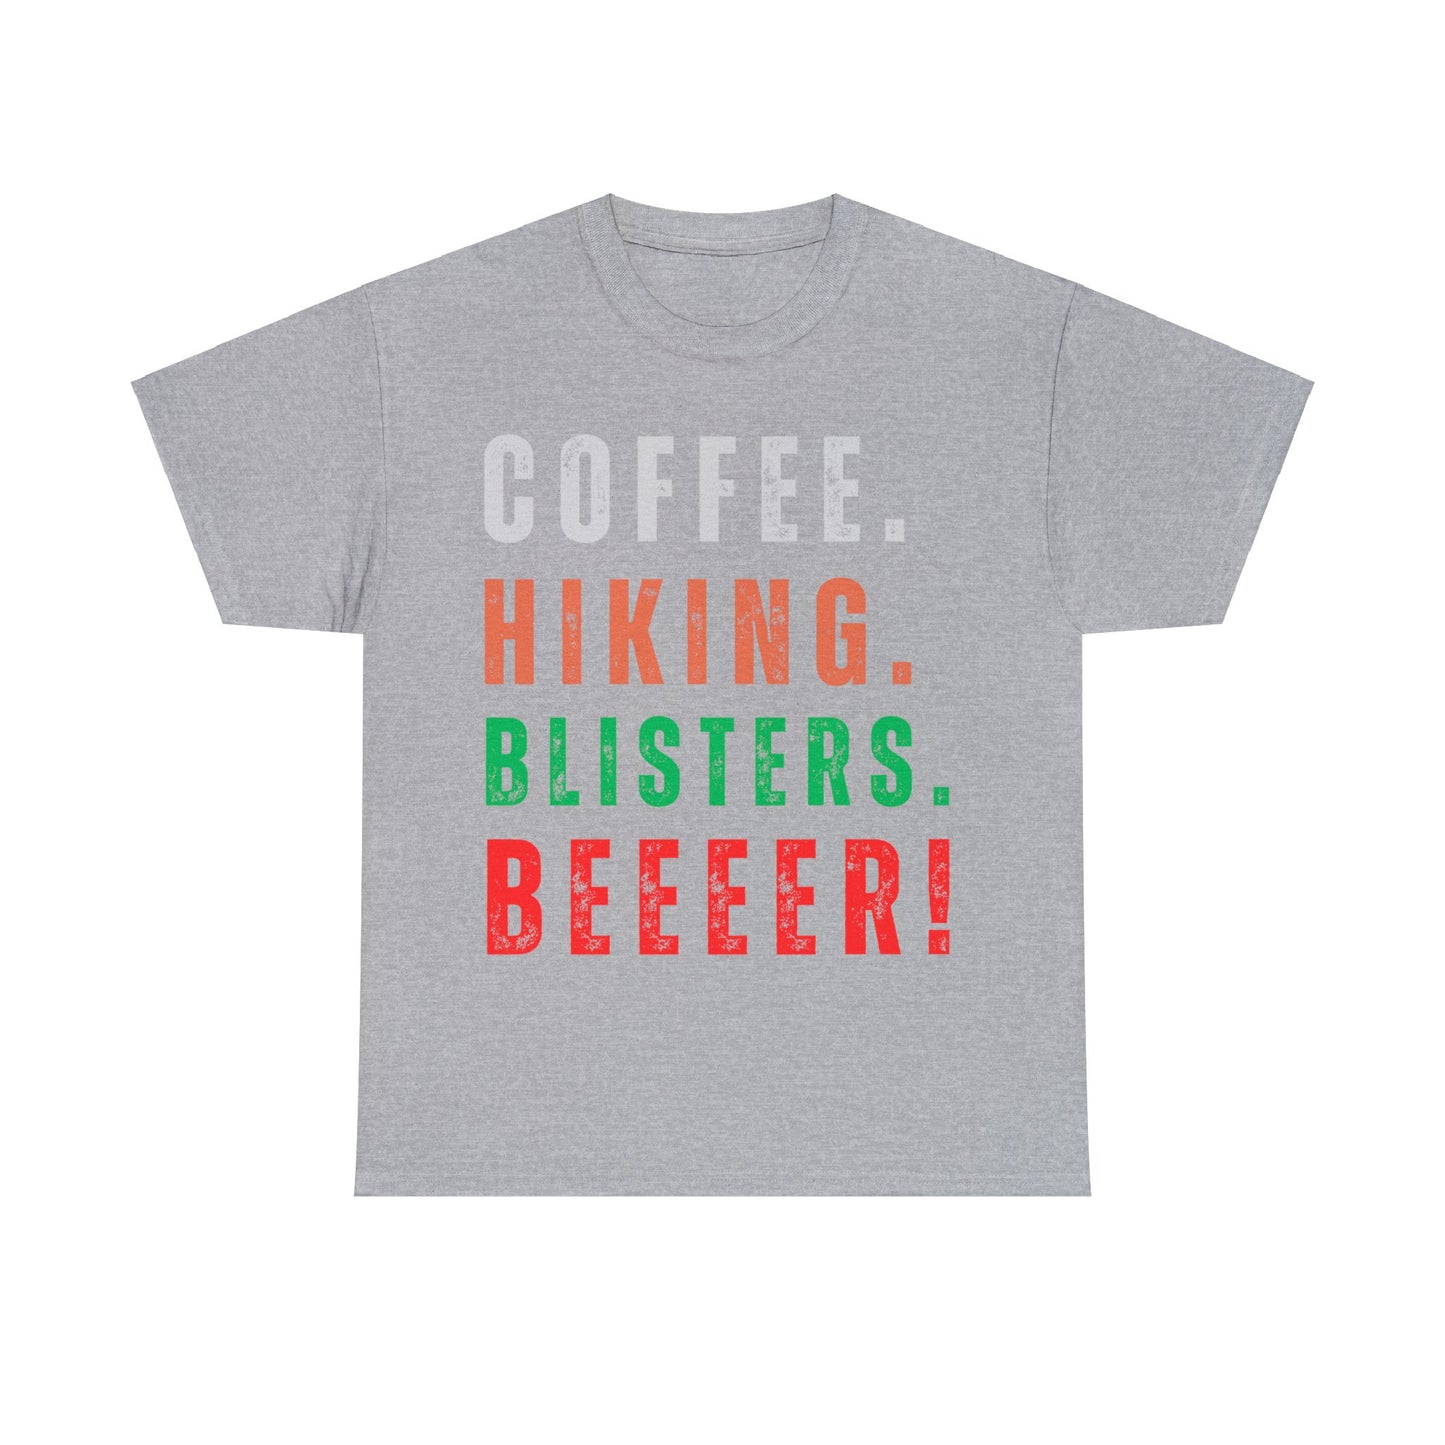 COFFEE. HIKING. BLISTERS. BEEEER T-Shirt - NOT SOLD IN STORES - Hiker, Trekker, Adventurer, Hiking, Trekking, Adventure Lover Express Delivery available